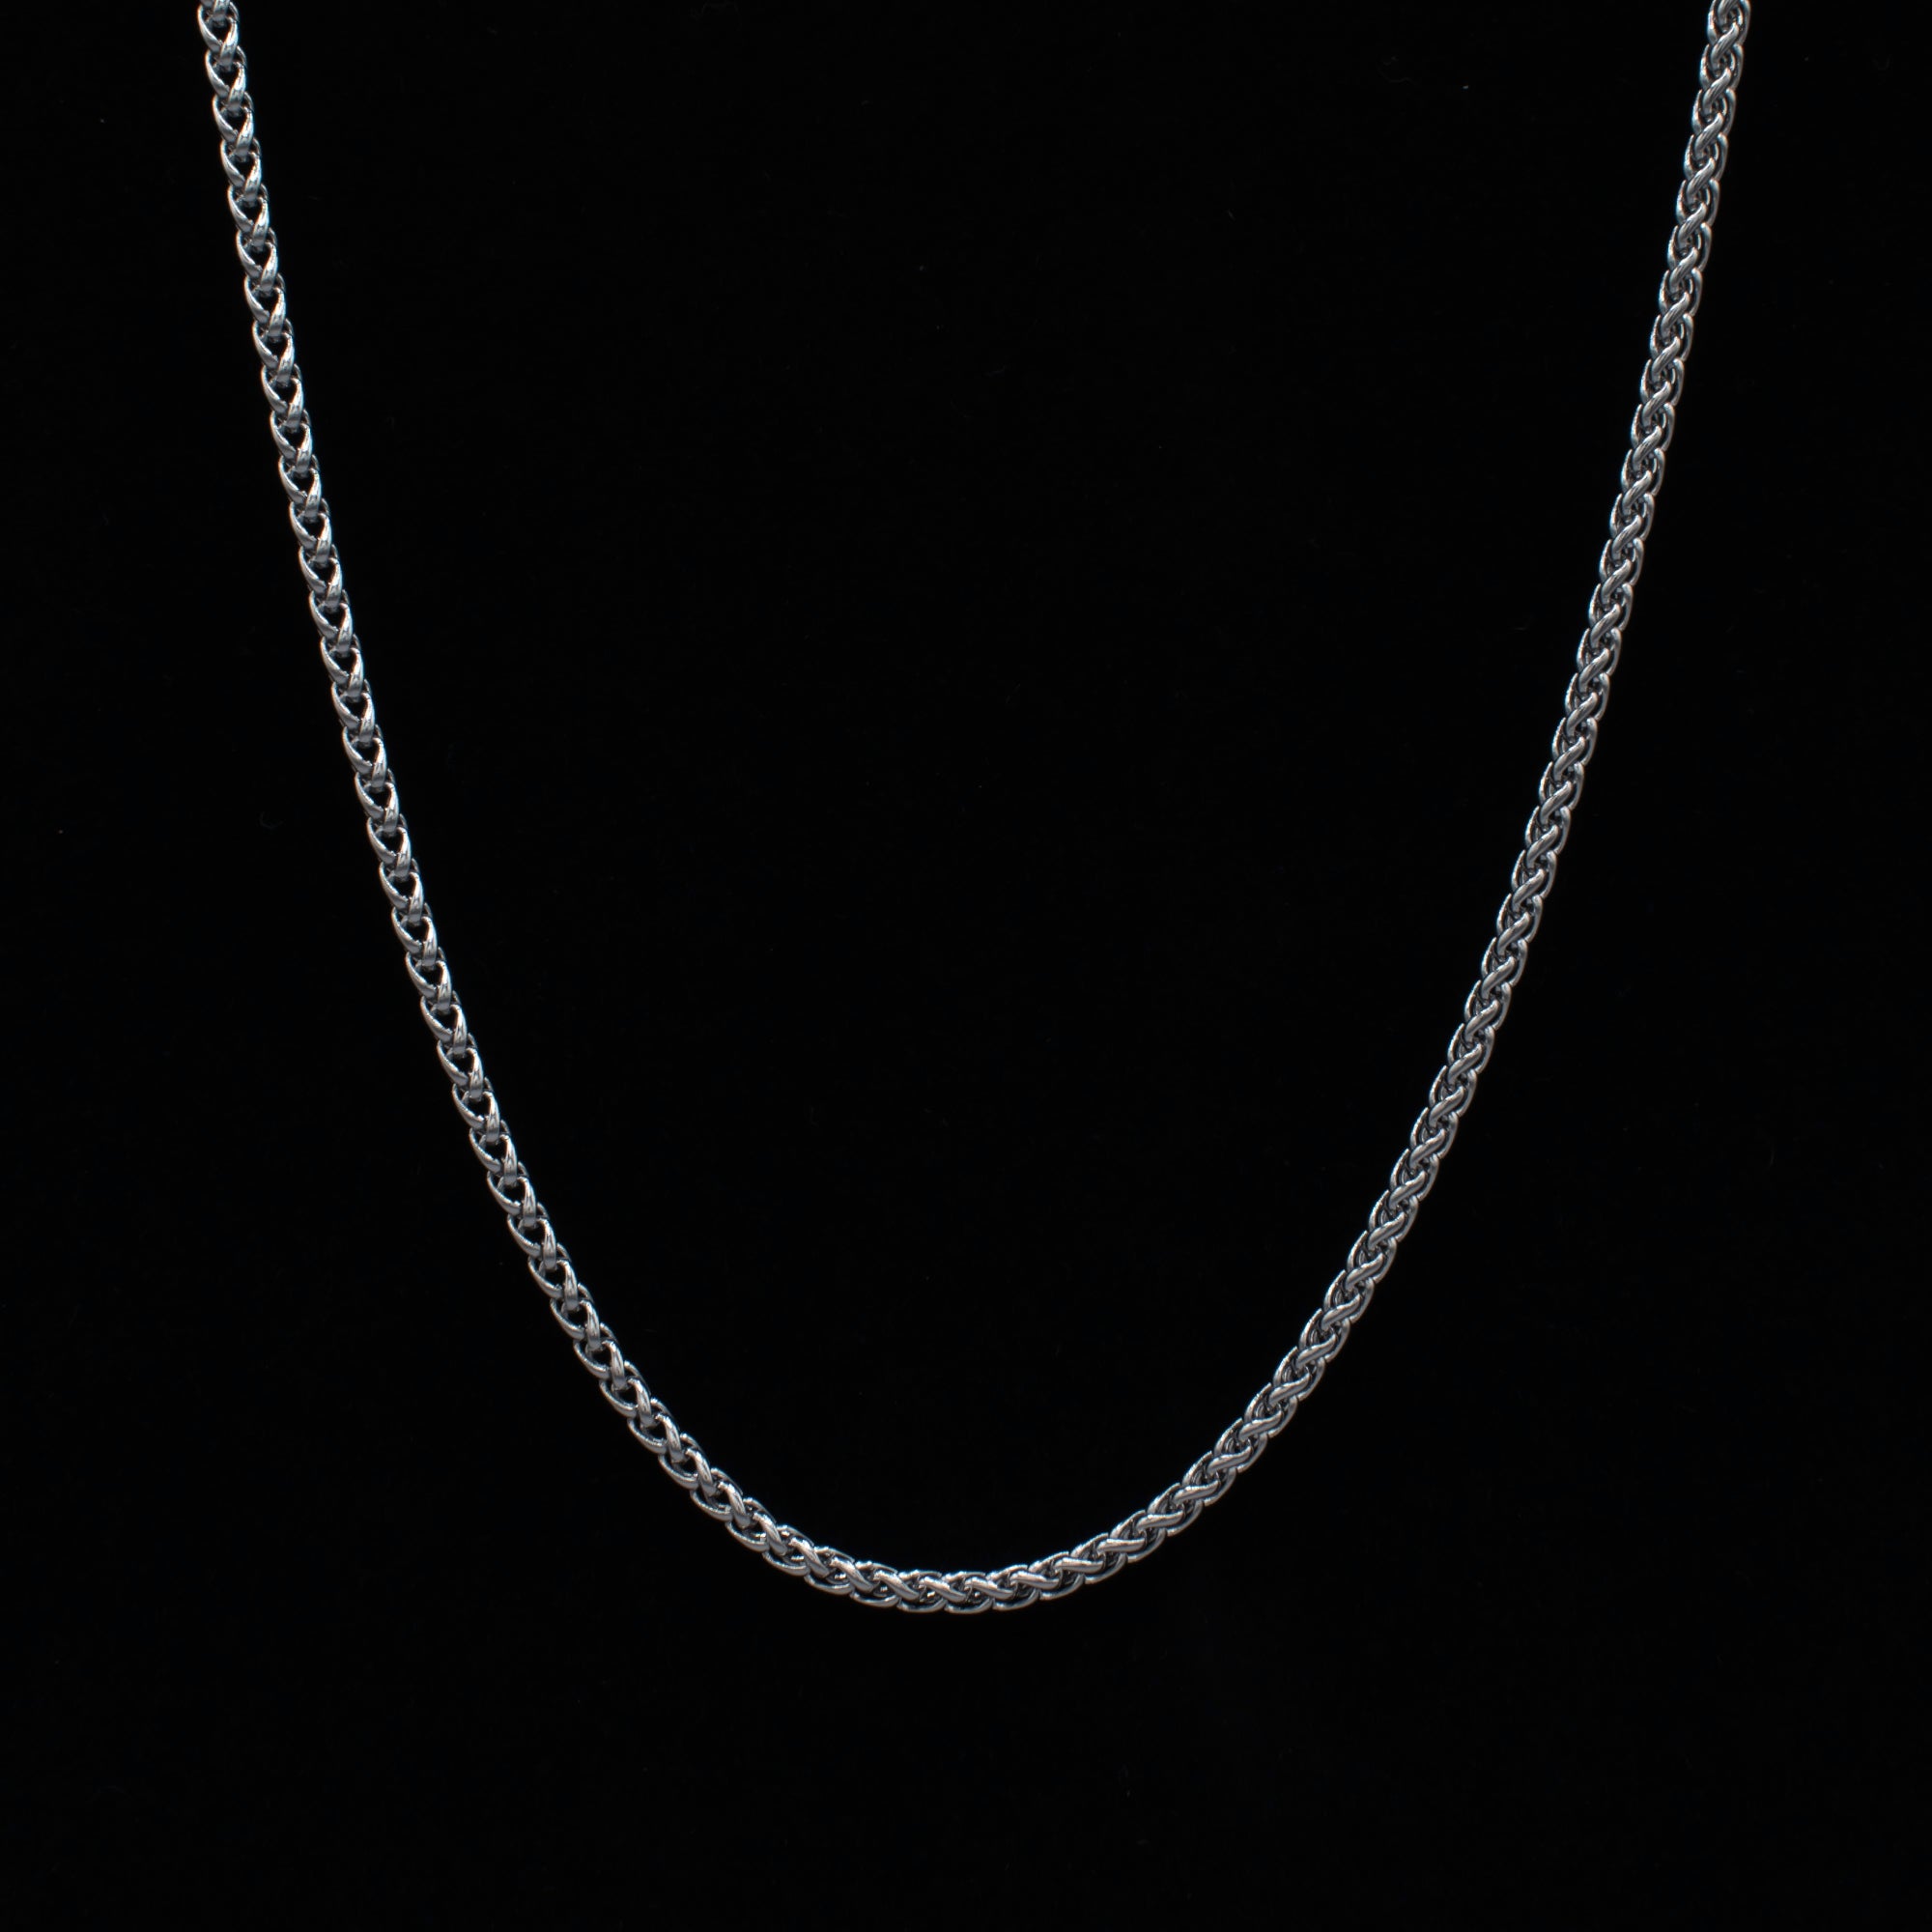 Foxtail Necklace - (Silver) 3mm